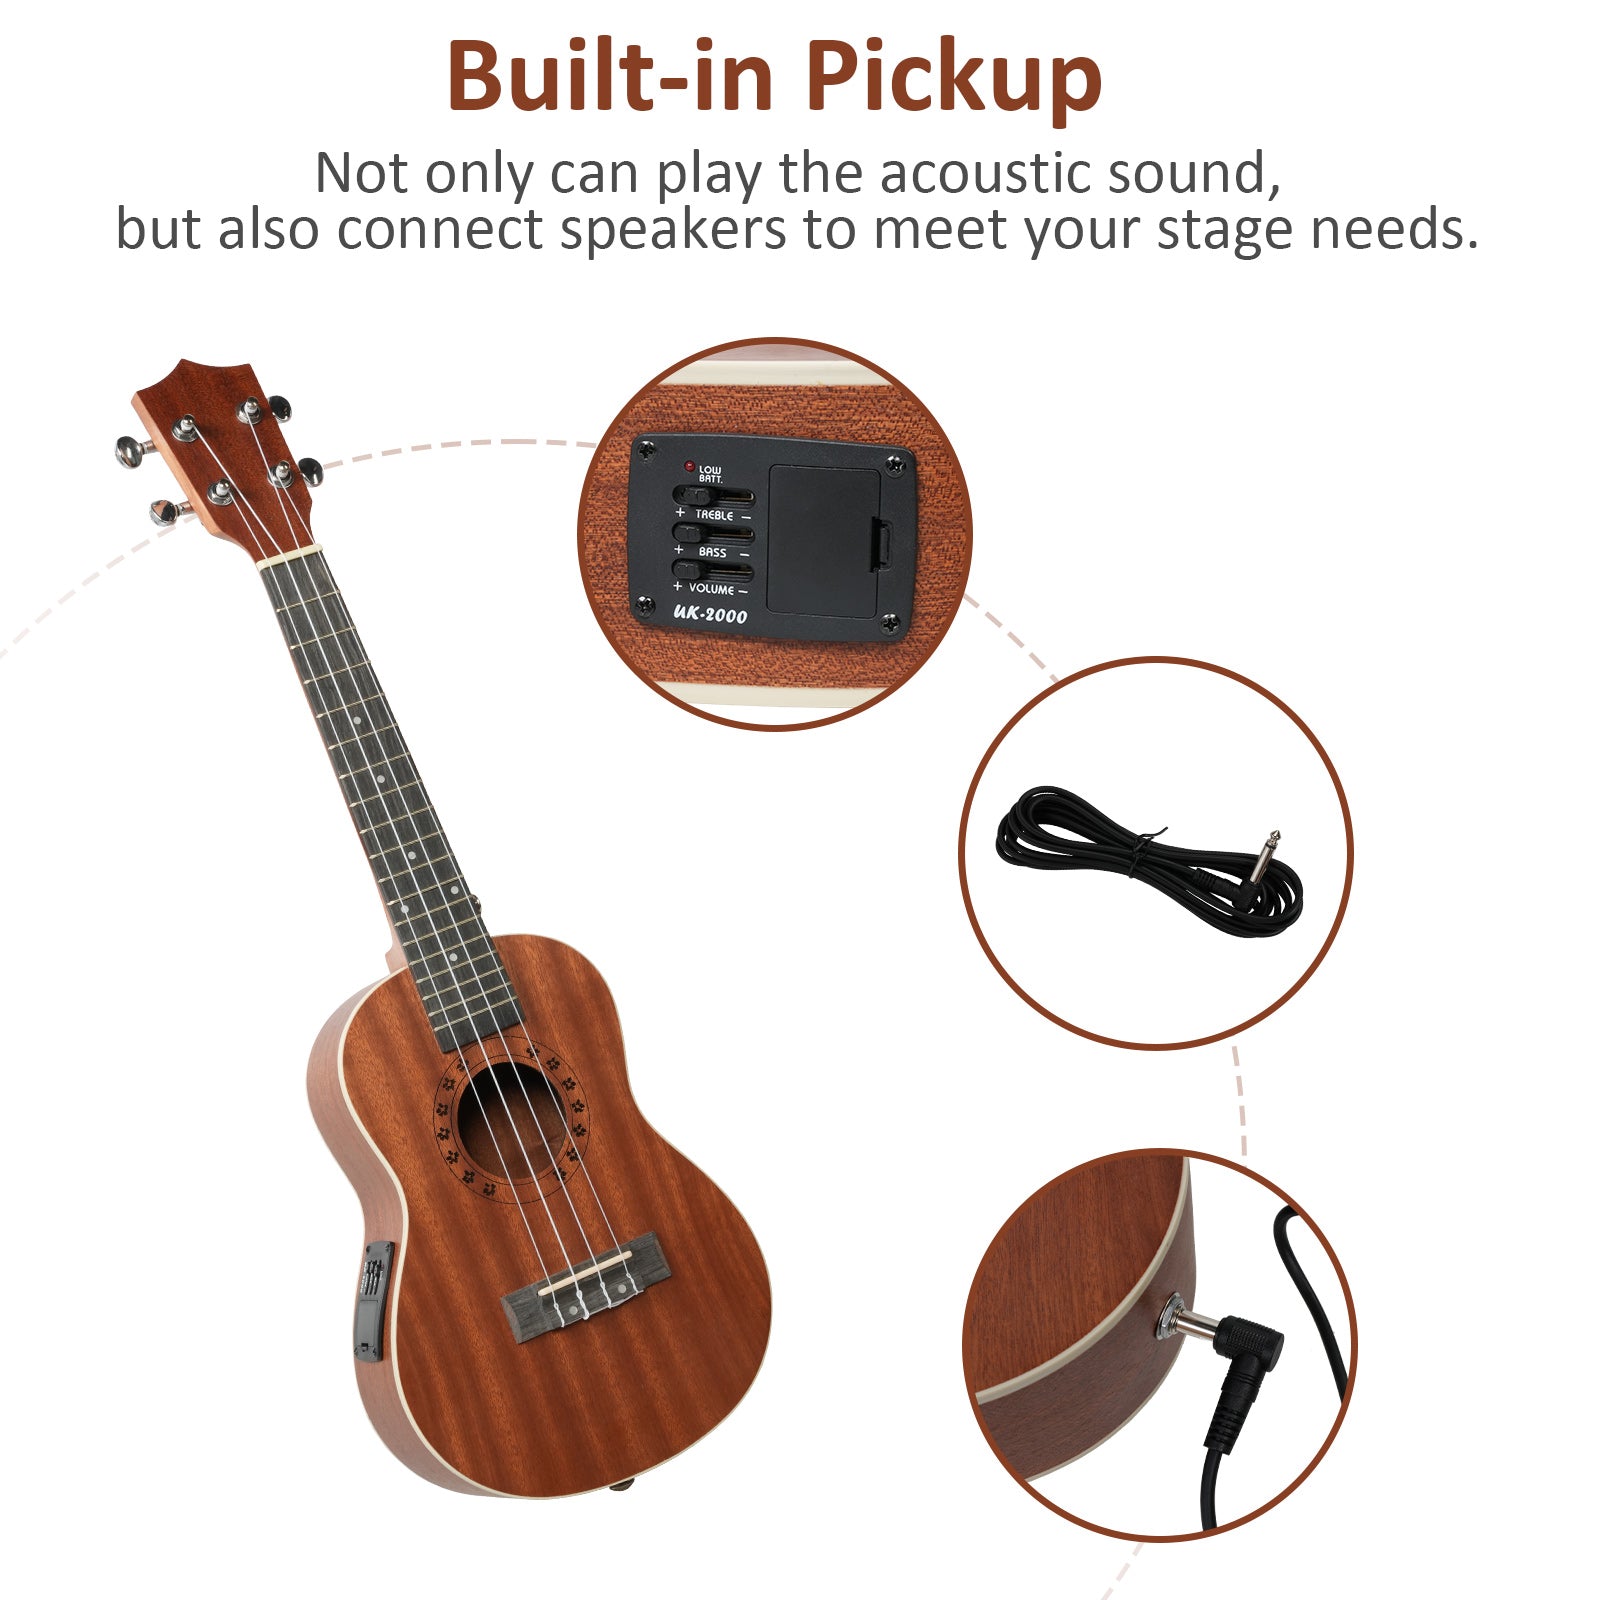 (Out of Stock) 23-inch Mahogany Wood Ukulele, Wooden Electric Ukulele Starter for Adult Practice or Performance, with Tuner Tape and Full Accessories